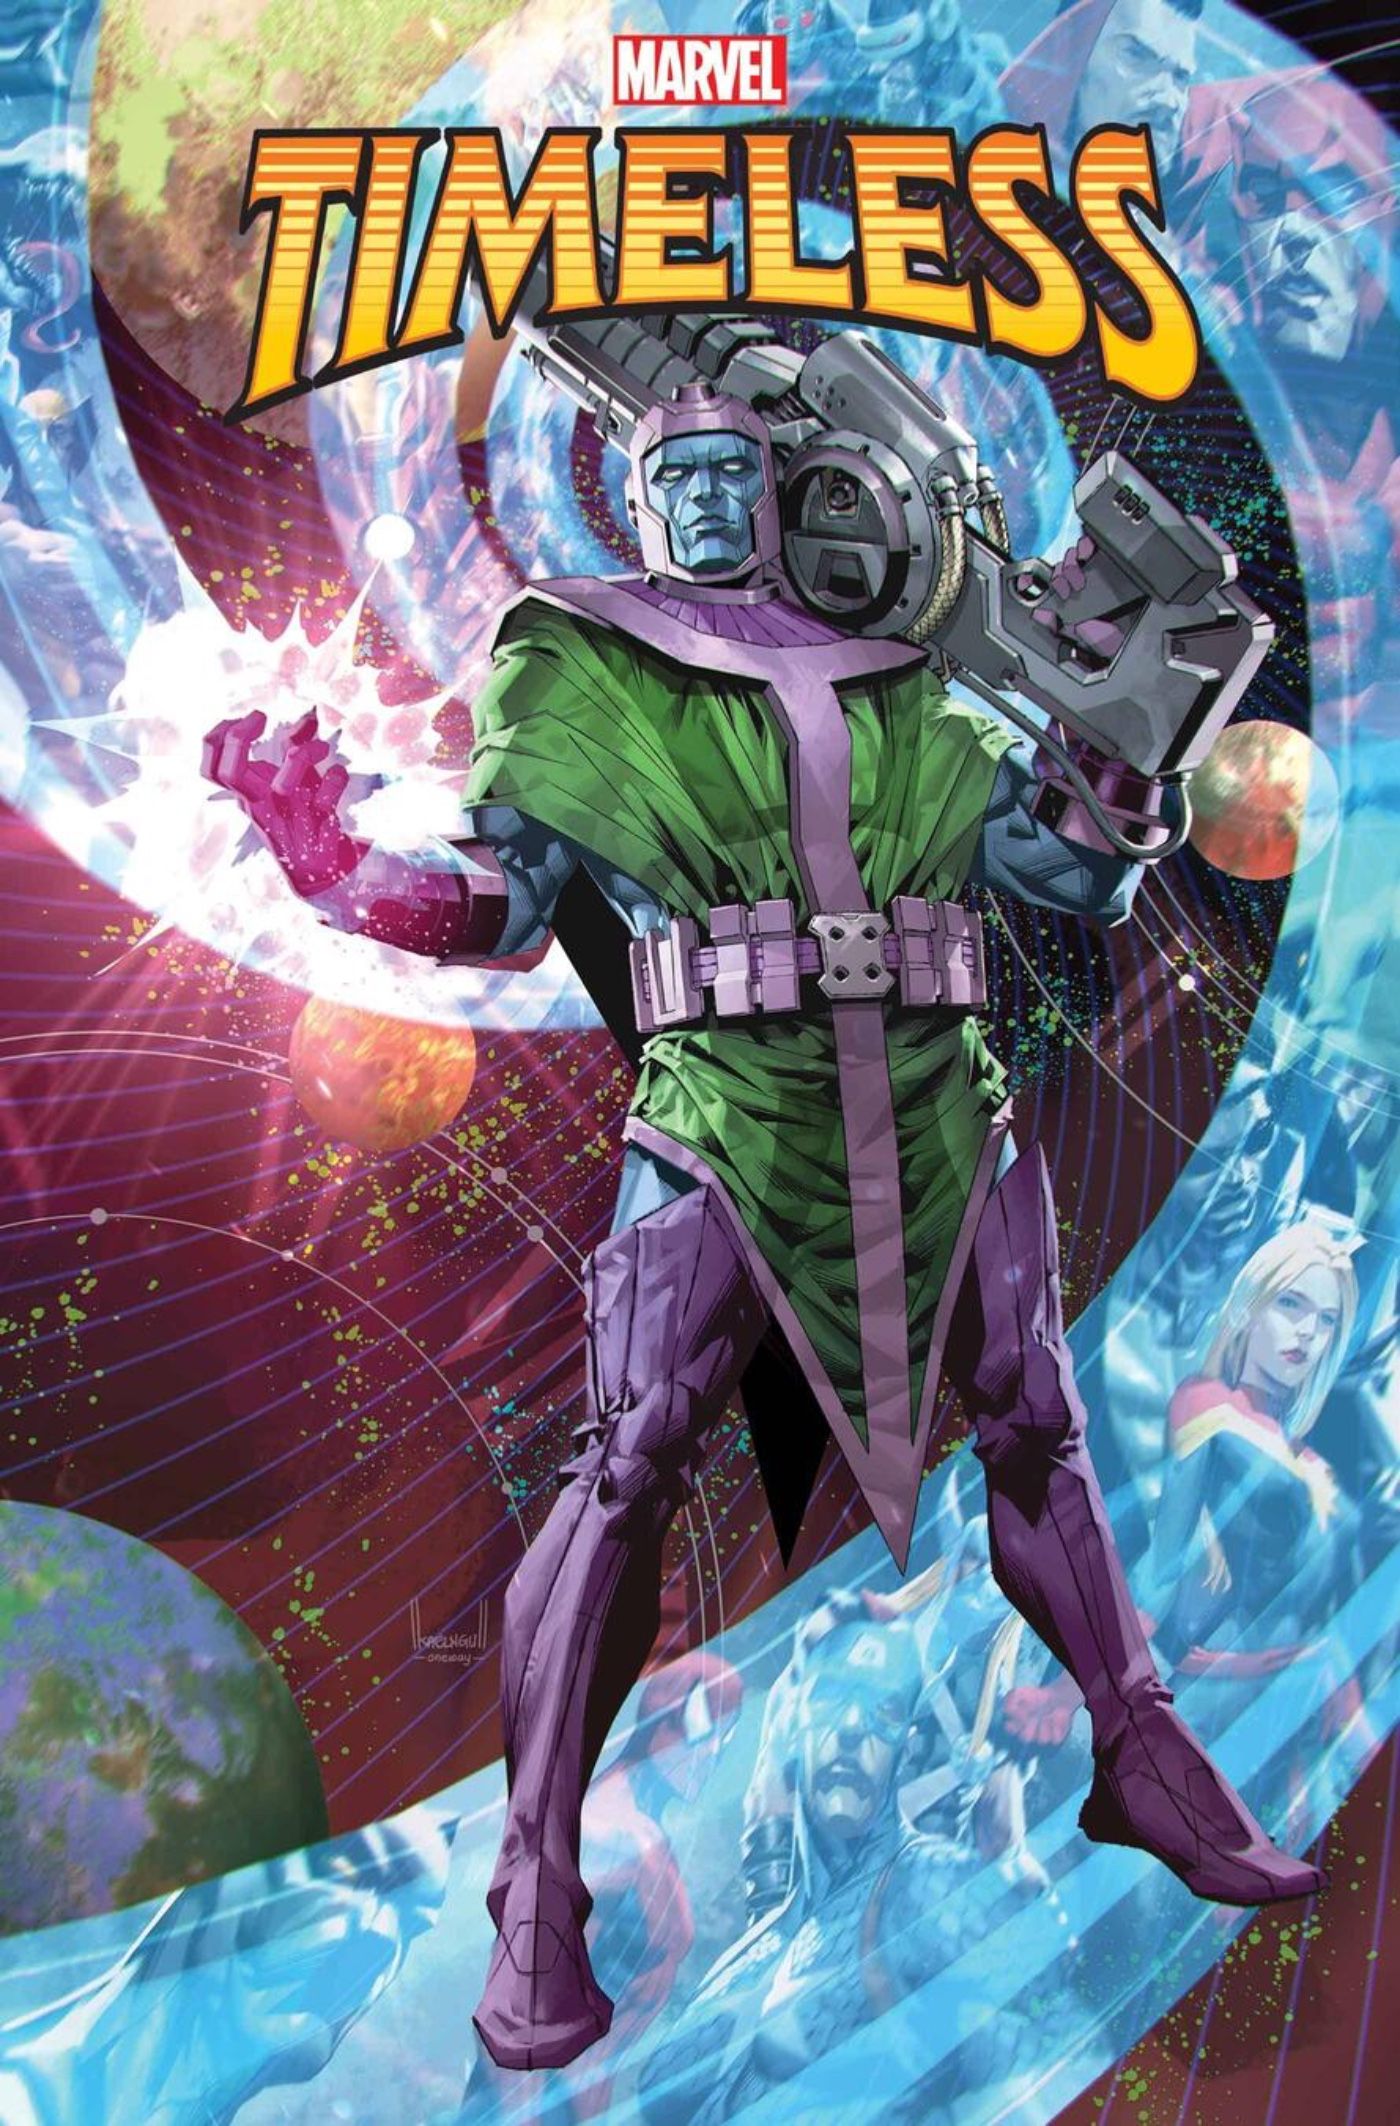 Only One Kang Is ‘The Conqueror,’ Timeless Writer Confirms